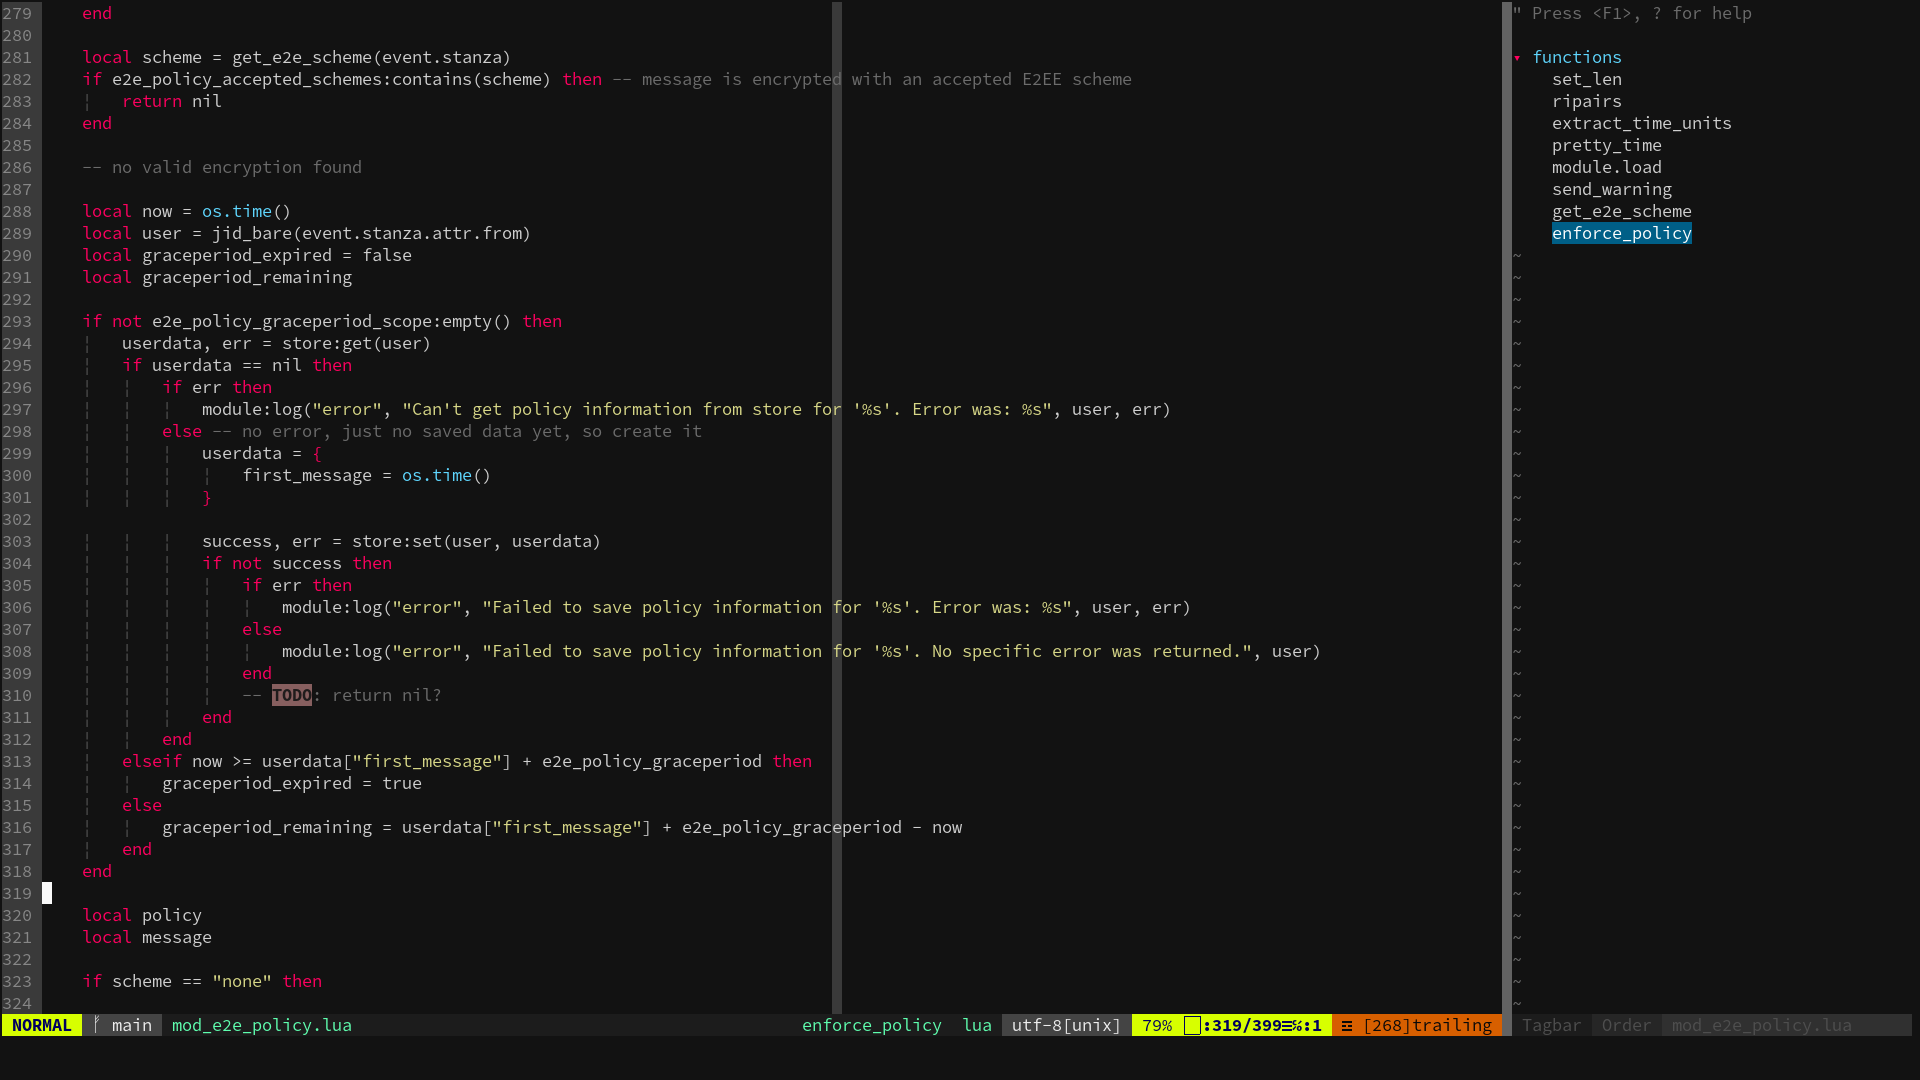 neovim with plugins editing our version of the Prosody E2EE enforcement module